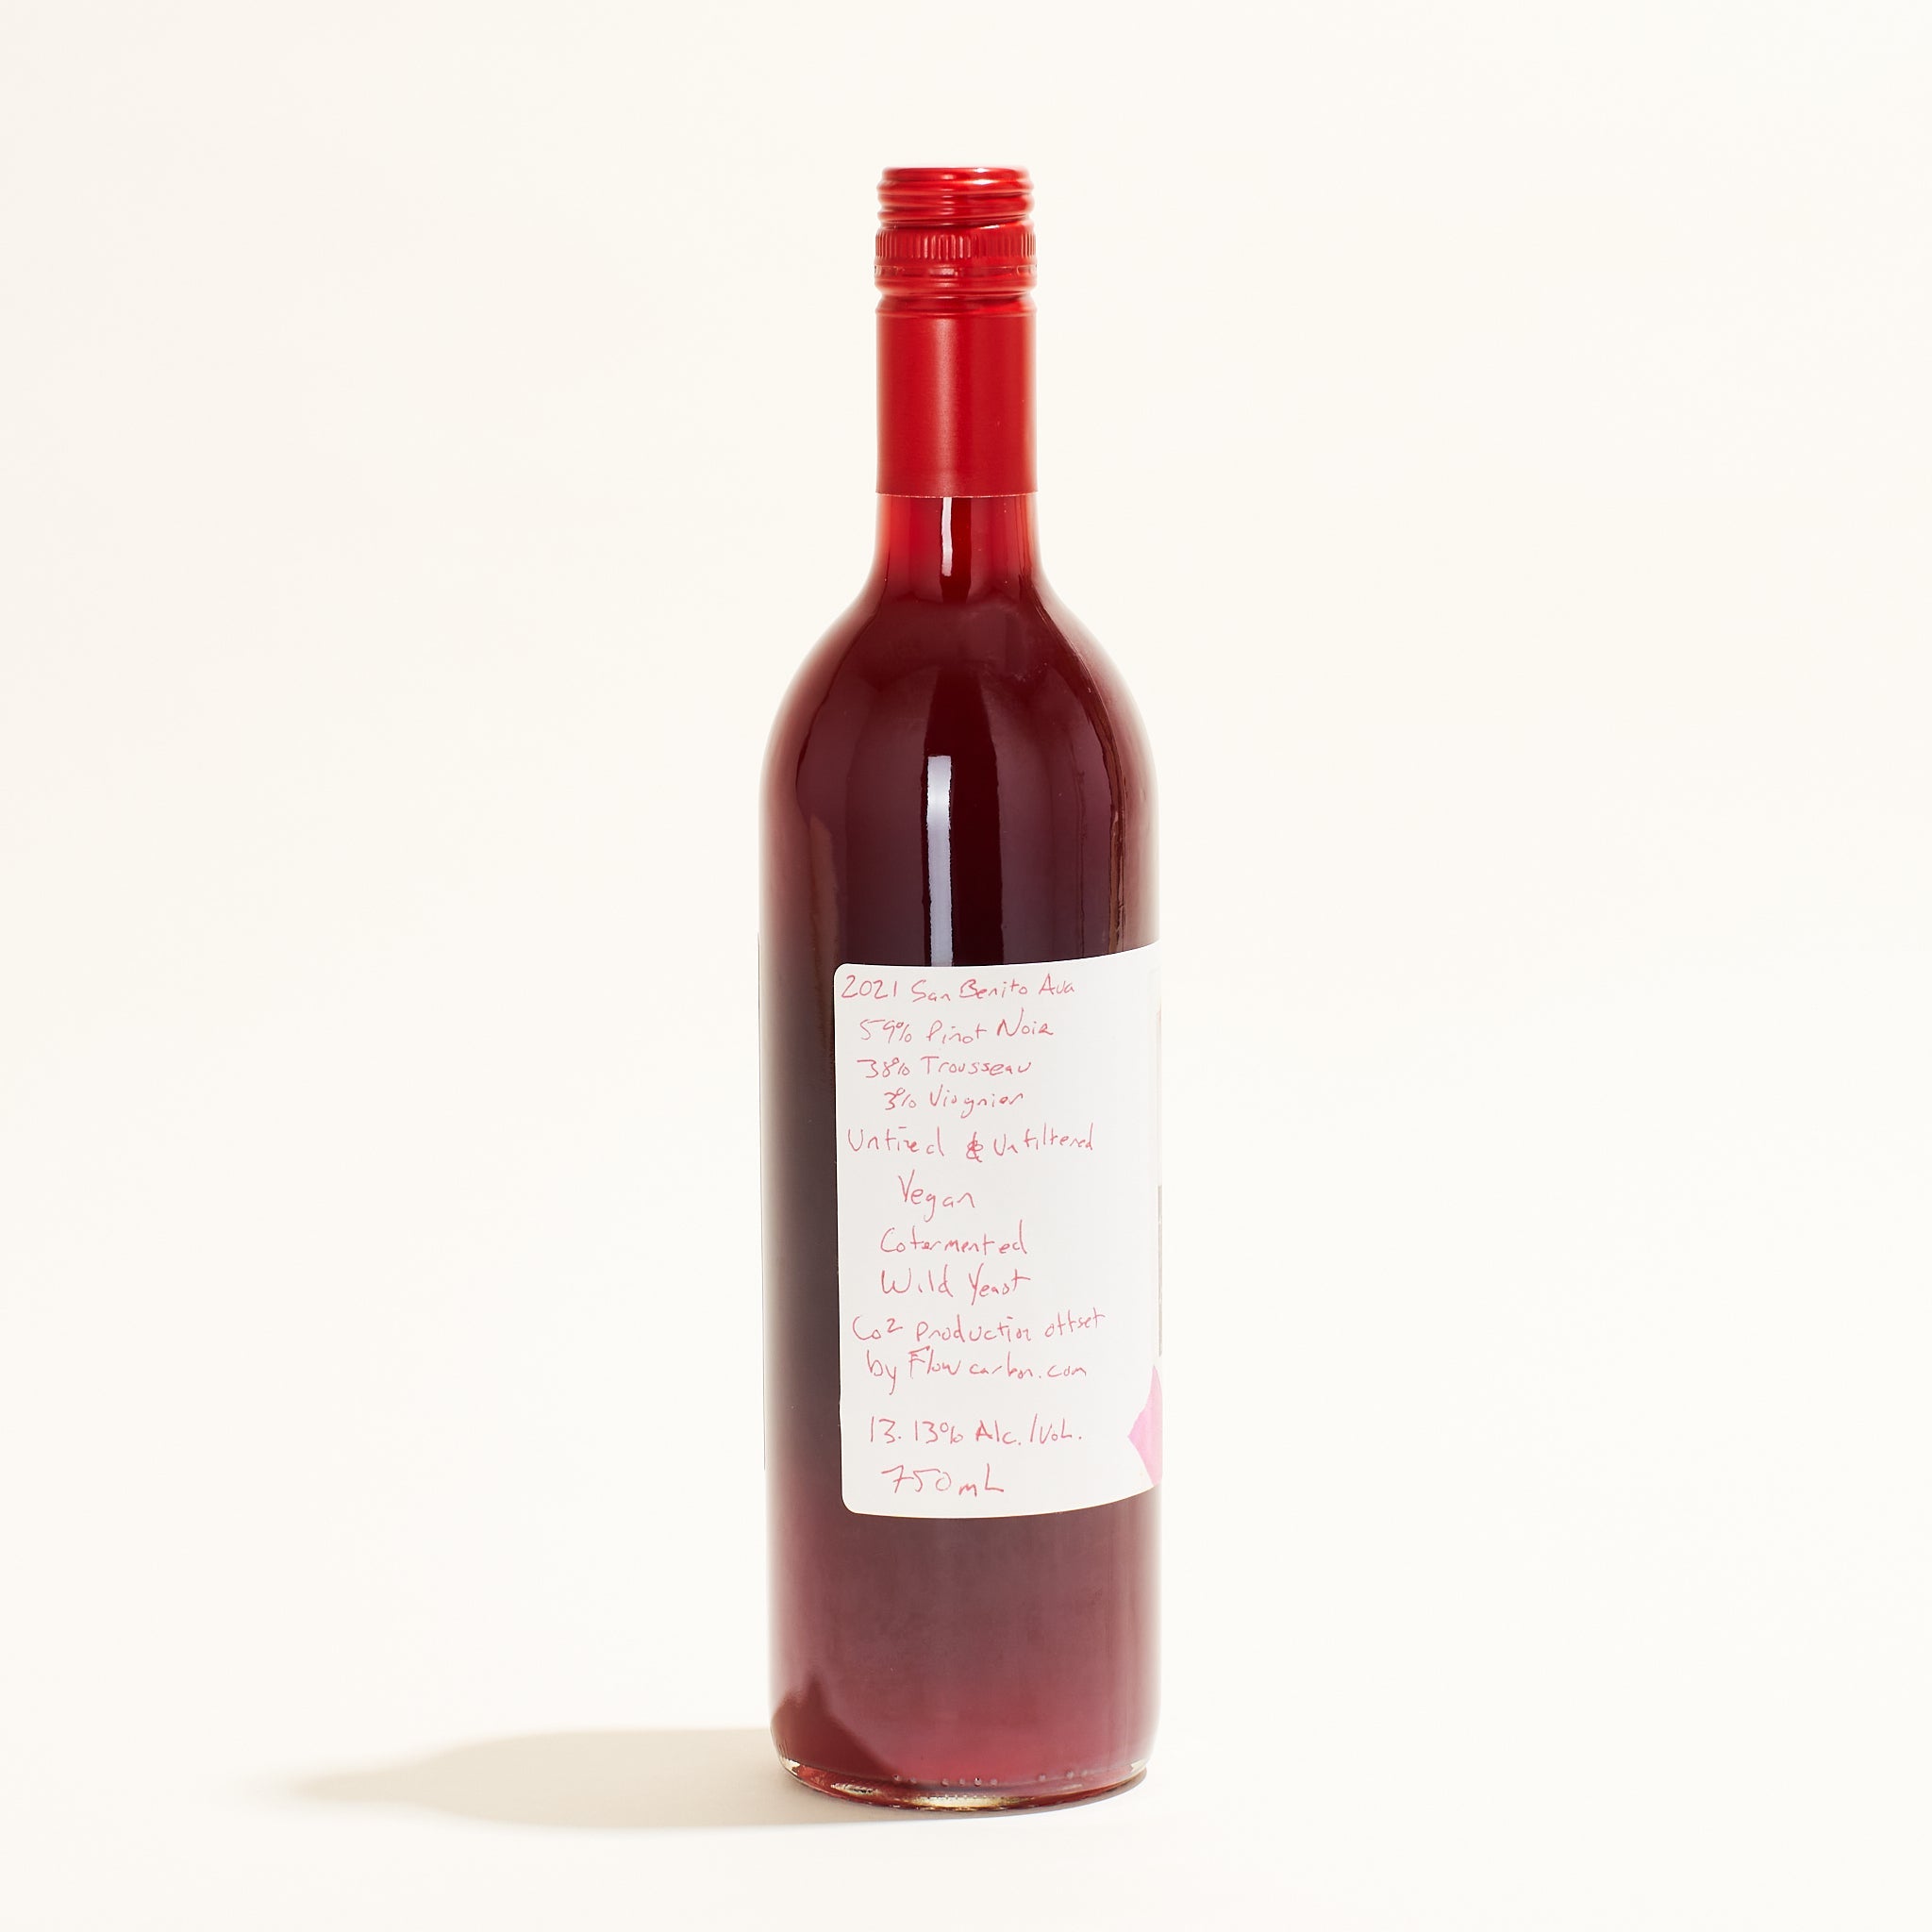 Man-Grey-Suit-Hollow-Wines-natural-red-wine-San-Benito-USA side